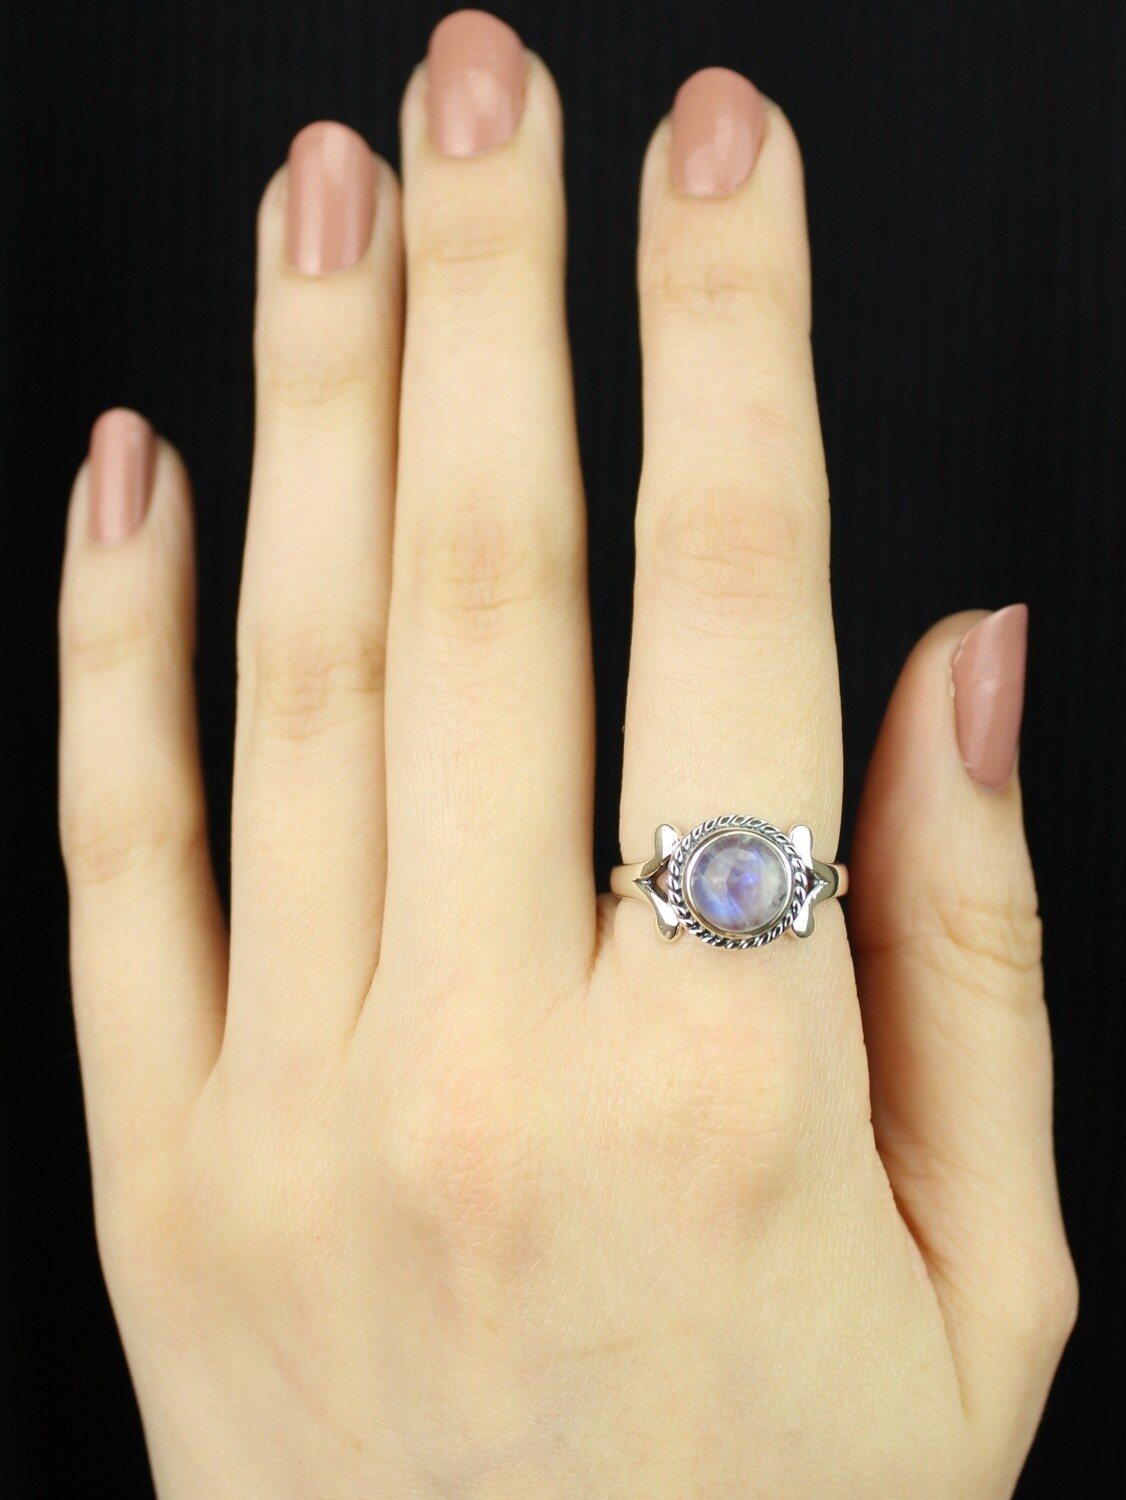 SIZE 8 - Sterling Silver Round Rainbow Moonstone Ring - RIG8115